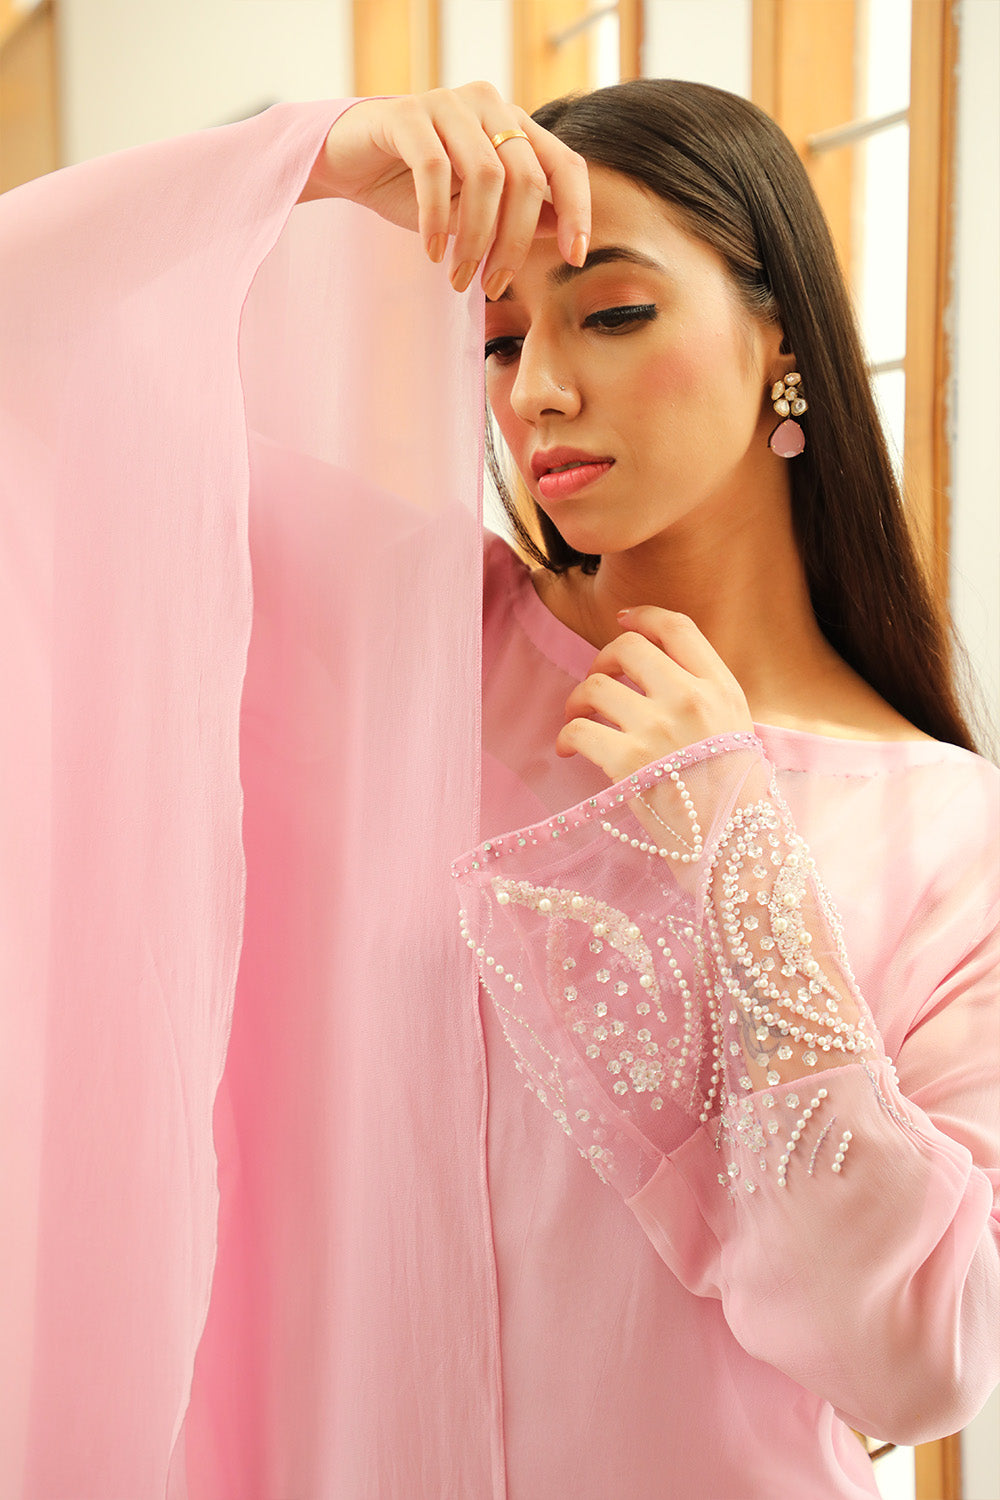 The Faria Set Peri-peri Pink Co-ord Set Named After Reita Faria Powel, An Indian Model, Doctor and Beauty Queen, Who Won Miss World 1996 to Become the First Asian Woman to Win the Title.